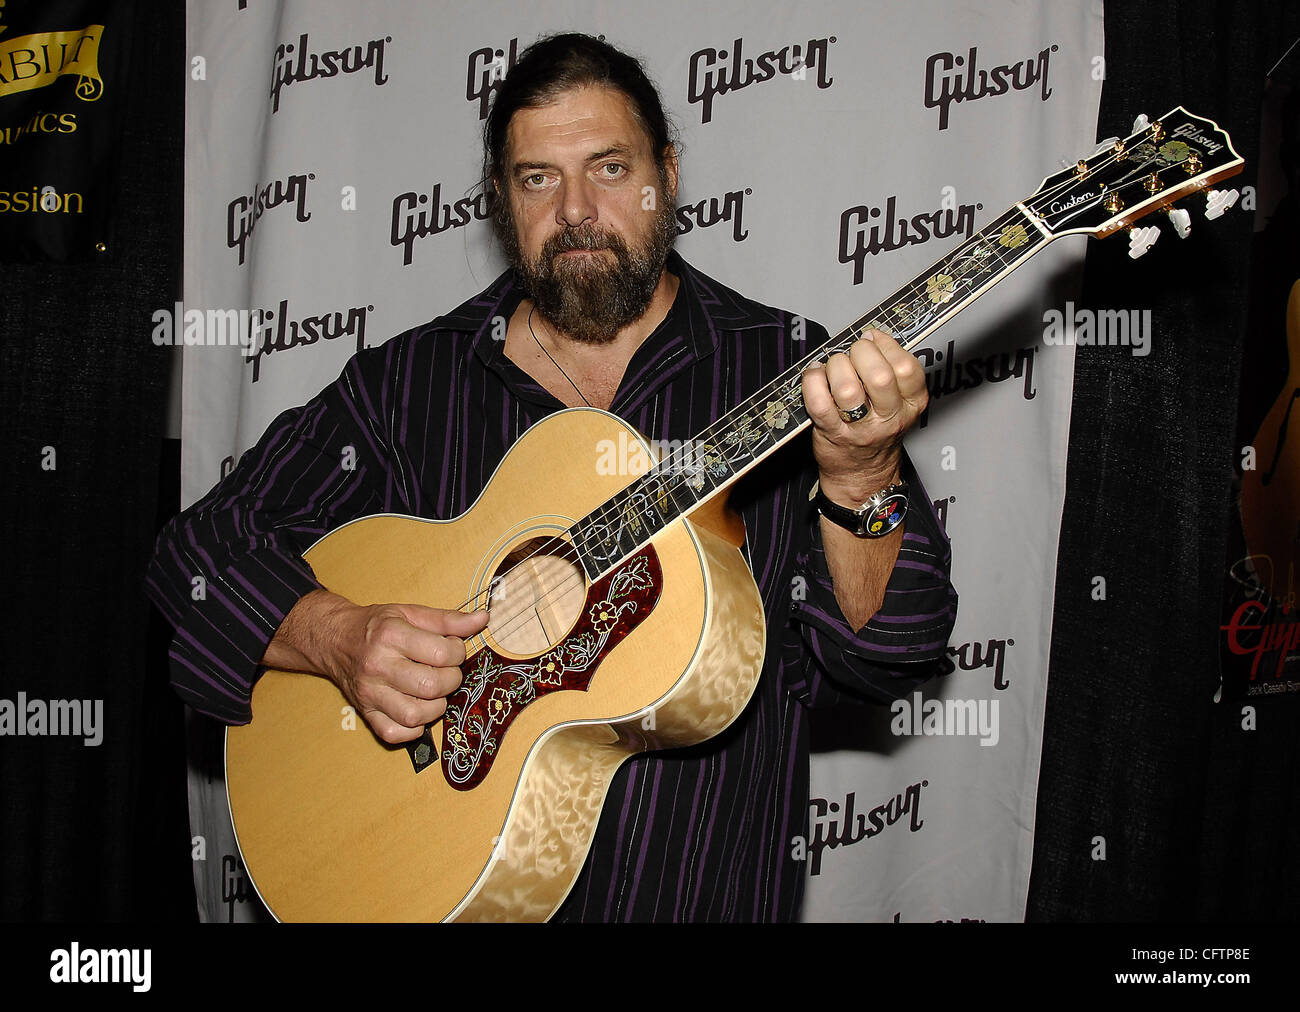 January 19, 2007; Anaheim, CA, USA; Musician ALAN PARSONS in the Gibson Guitar Corporation's booth at The NAMM Show '07. Mandatory Credit: Photo by Vaughn Youtz/ZUMA Press. (©) Copyright 2007 by Vaughn Youtz. Stock Photo